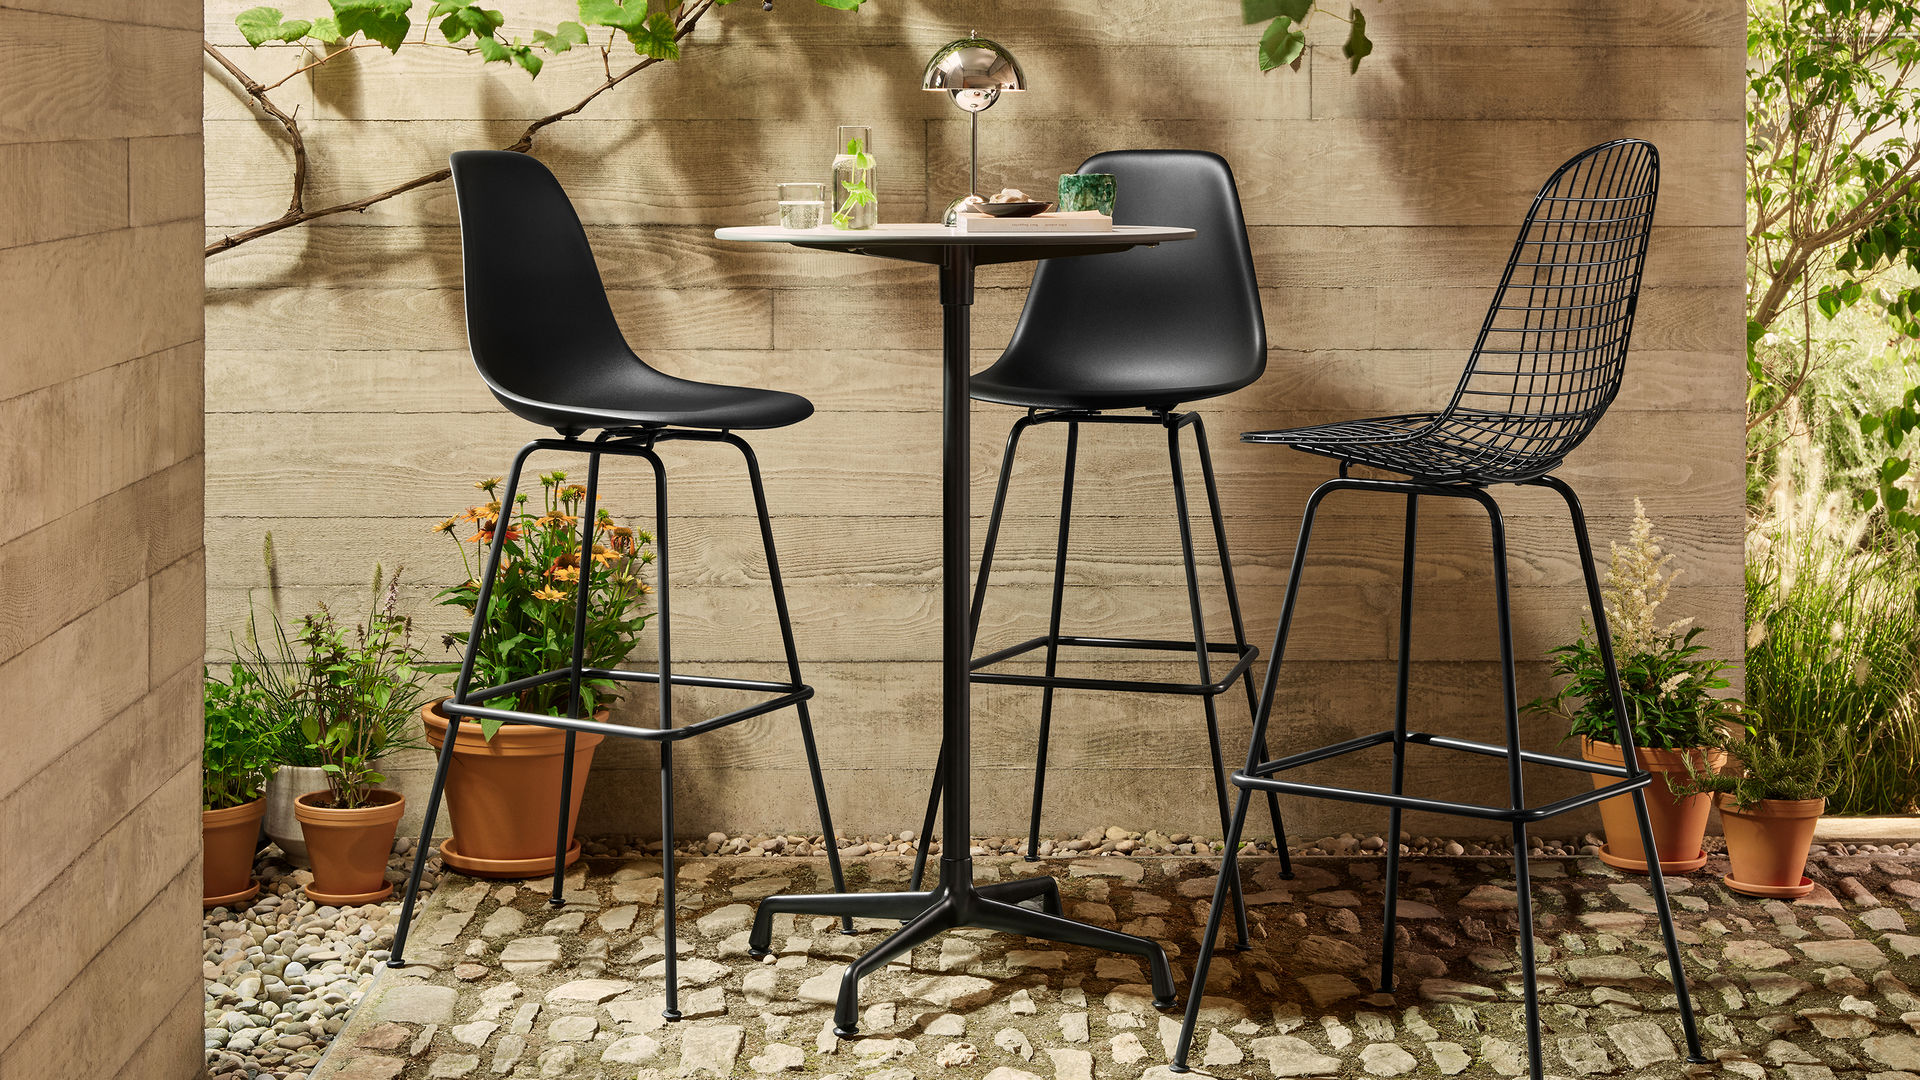 Outdoor Terrace Eames Plastic Stool High Wire Stool High Eames Contract Table High_LANDSCAPE_web_16-9